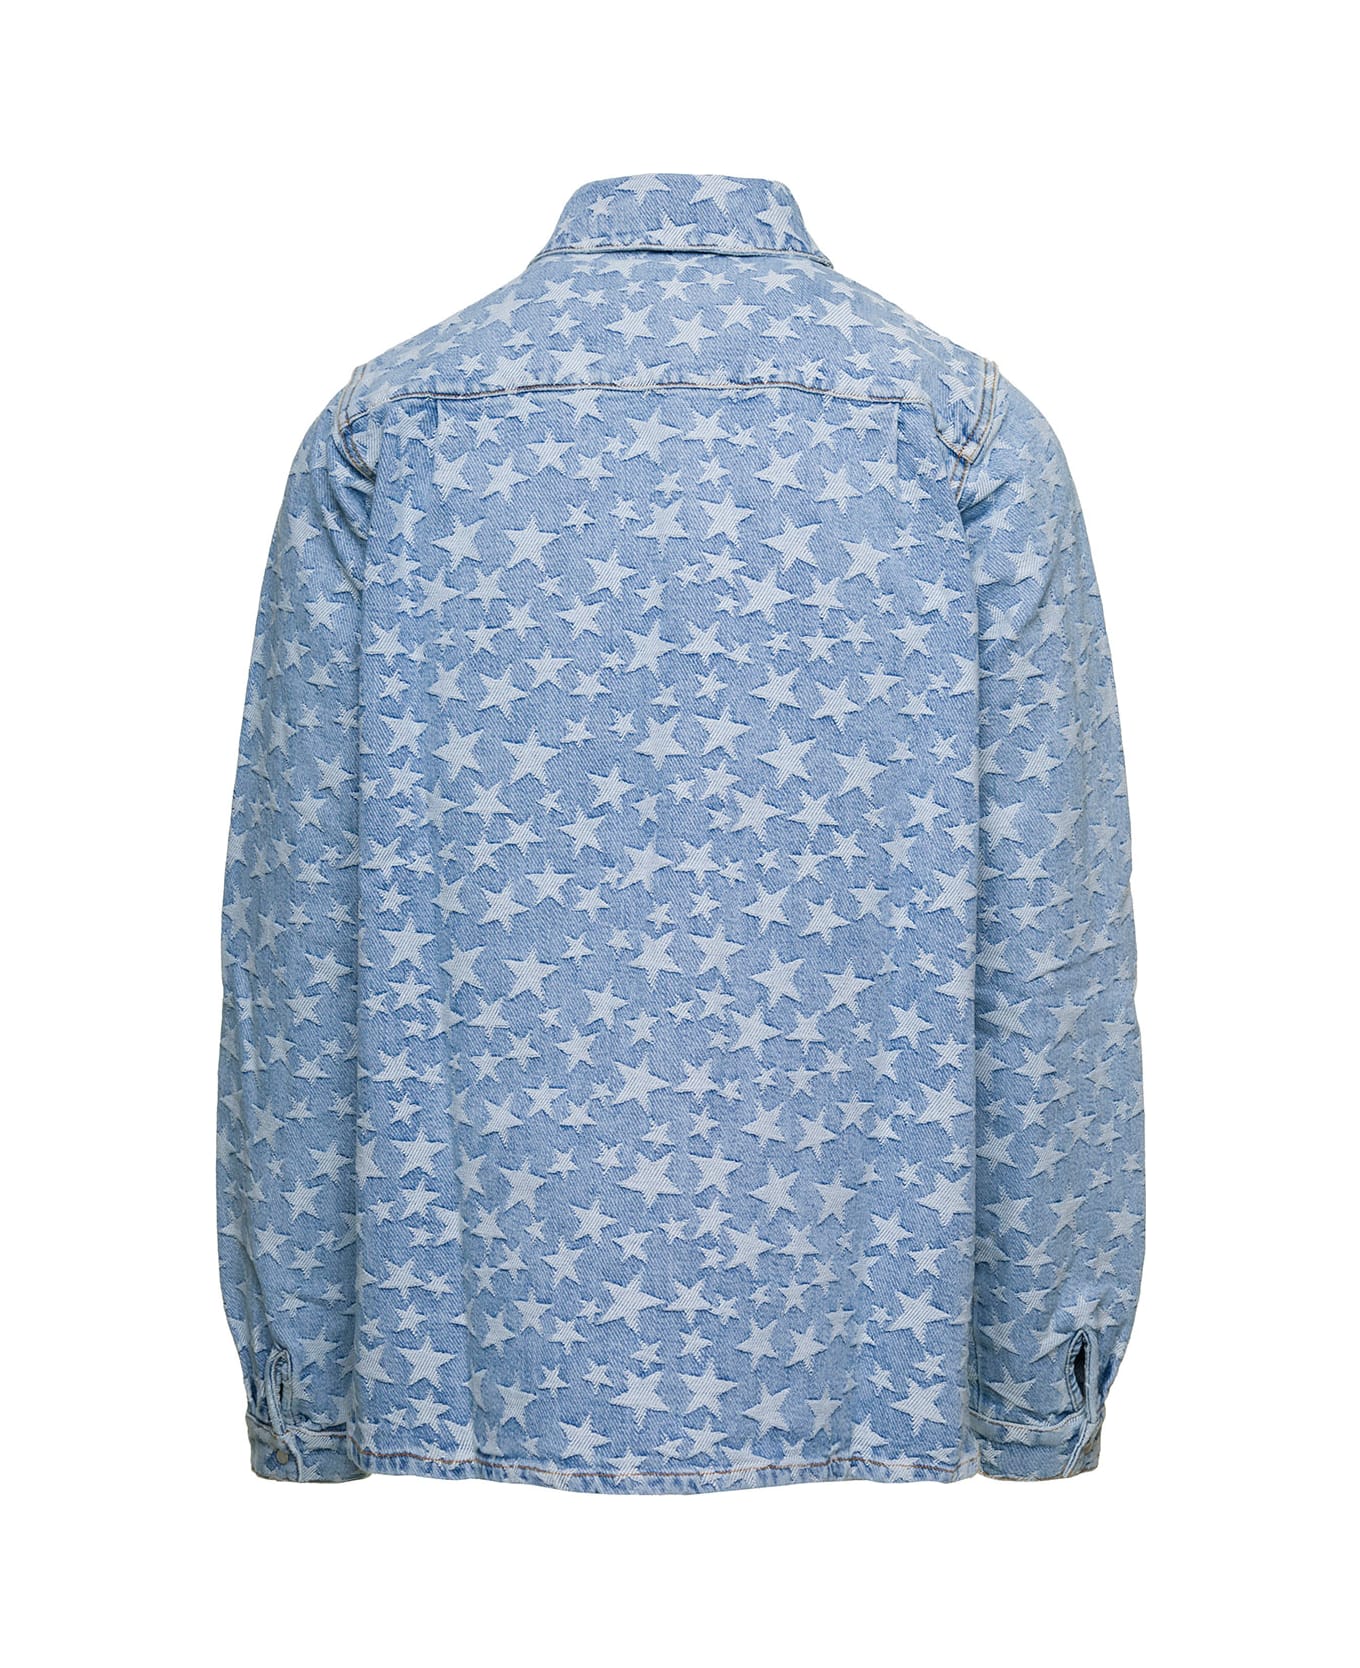 ERL Light Blue Long Sleeve Shirt With All-over Star Print In Cotton Denim - Light blue